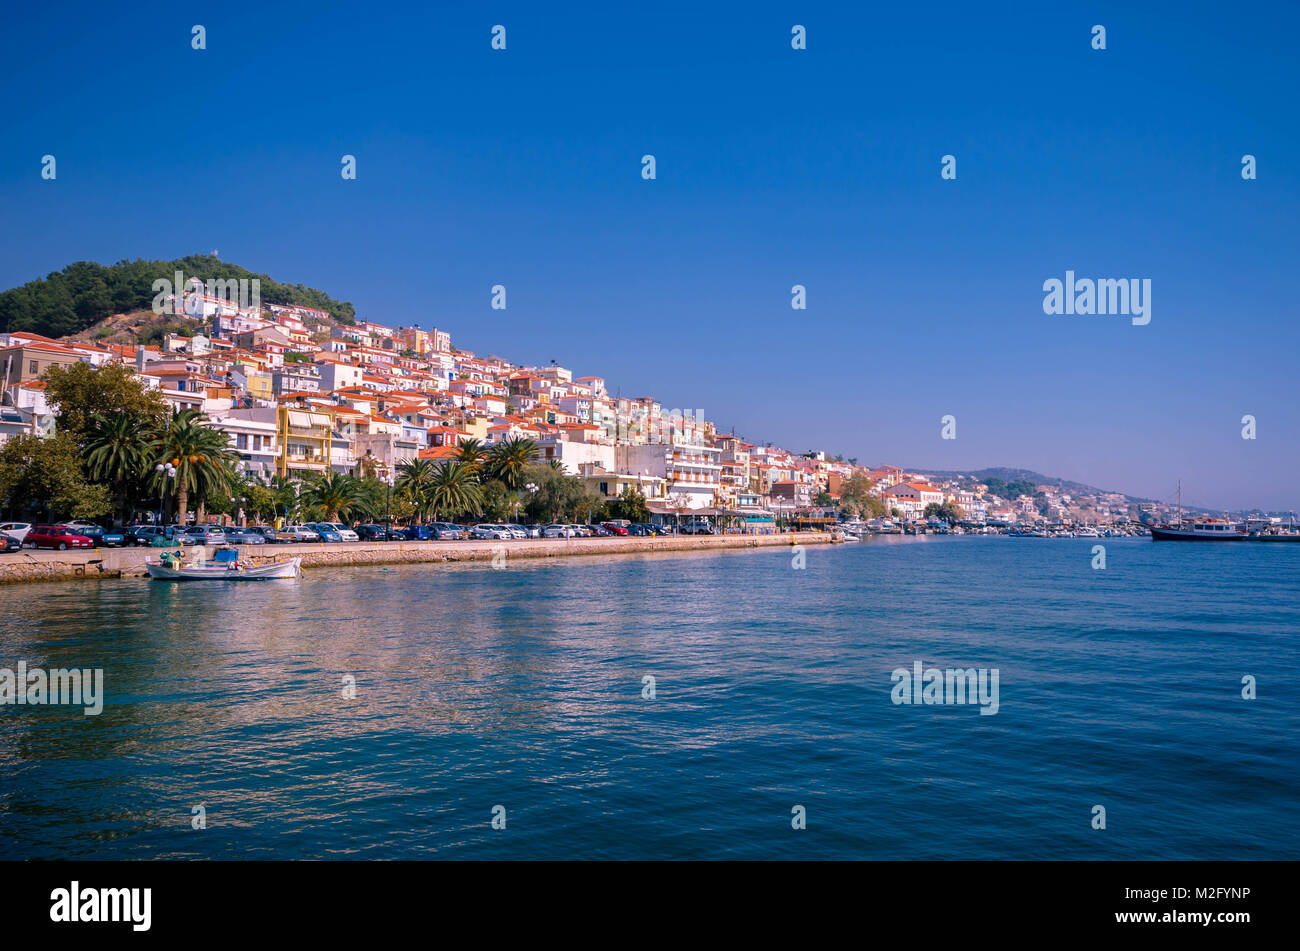 Plomari Lesvos October 22 2017-The picturesque fish village of Plomari, known  as the place that the famous ouzo the is produced. Lesvos Greece Stock Photo